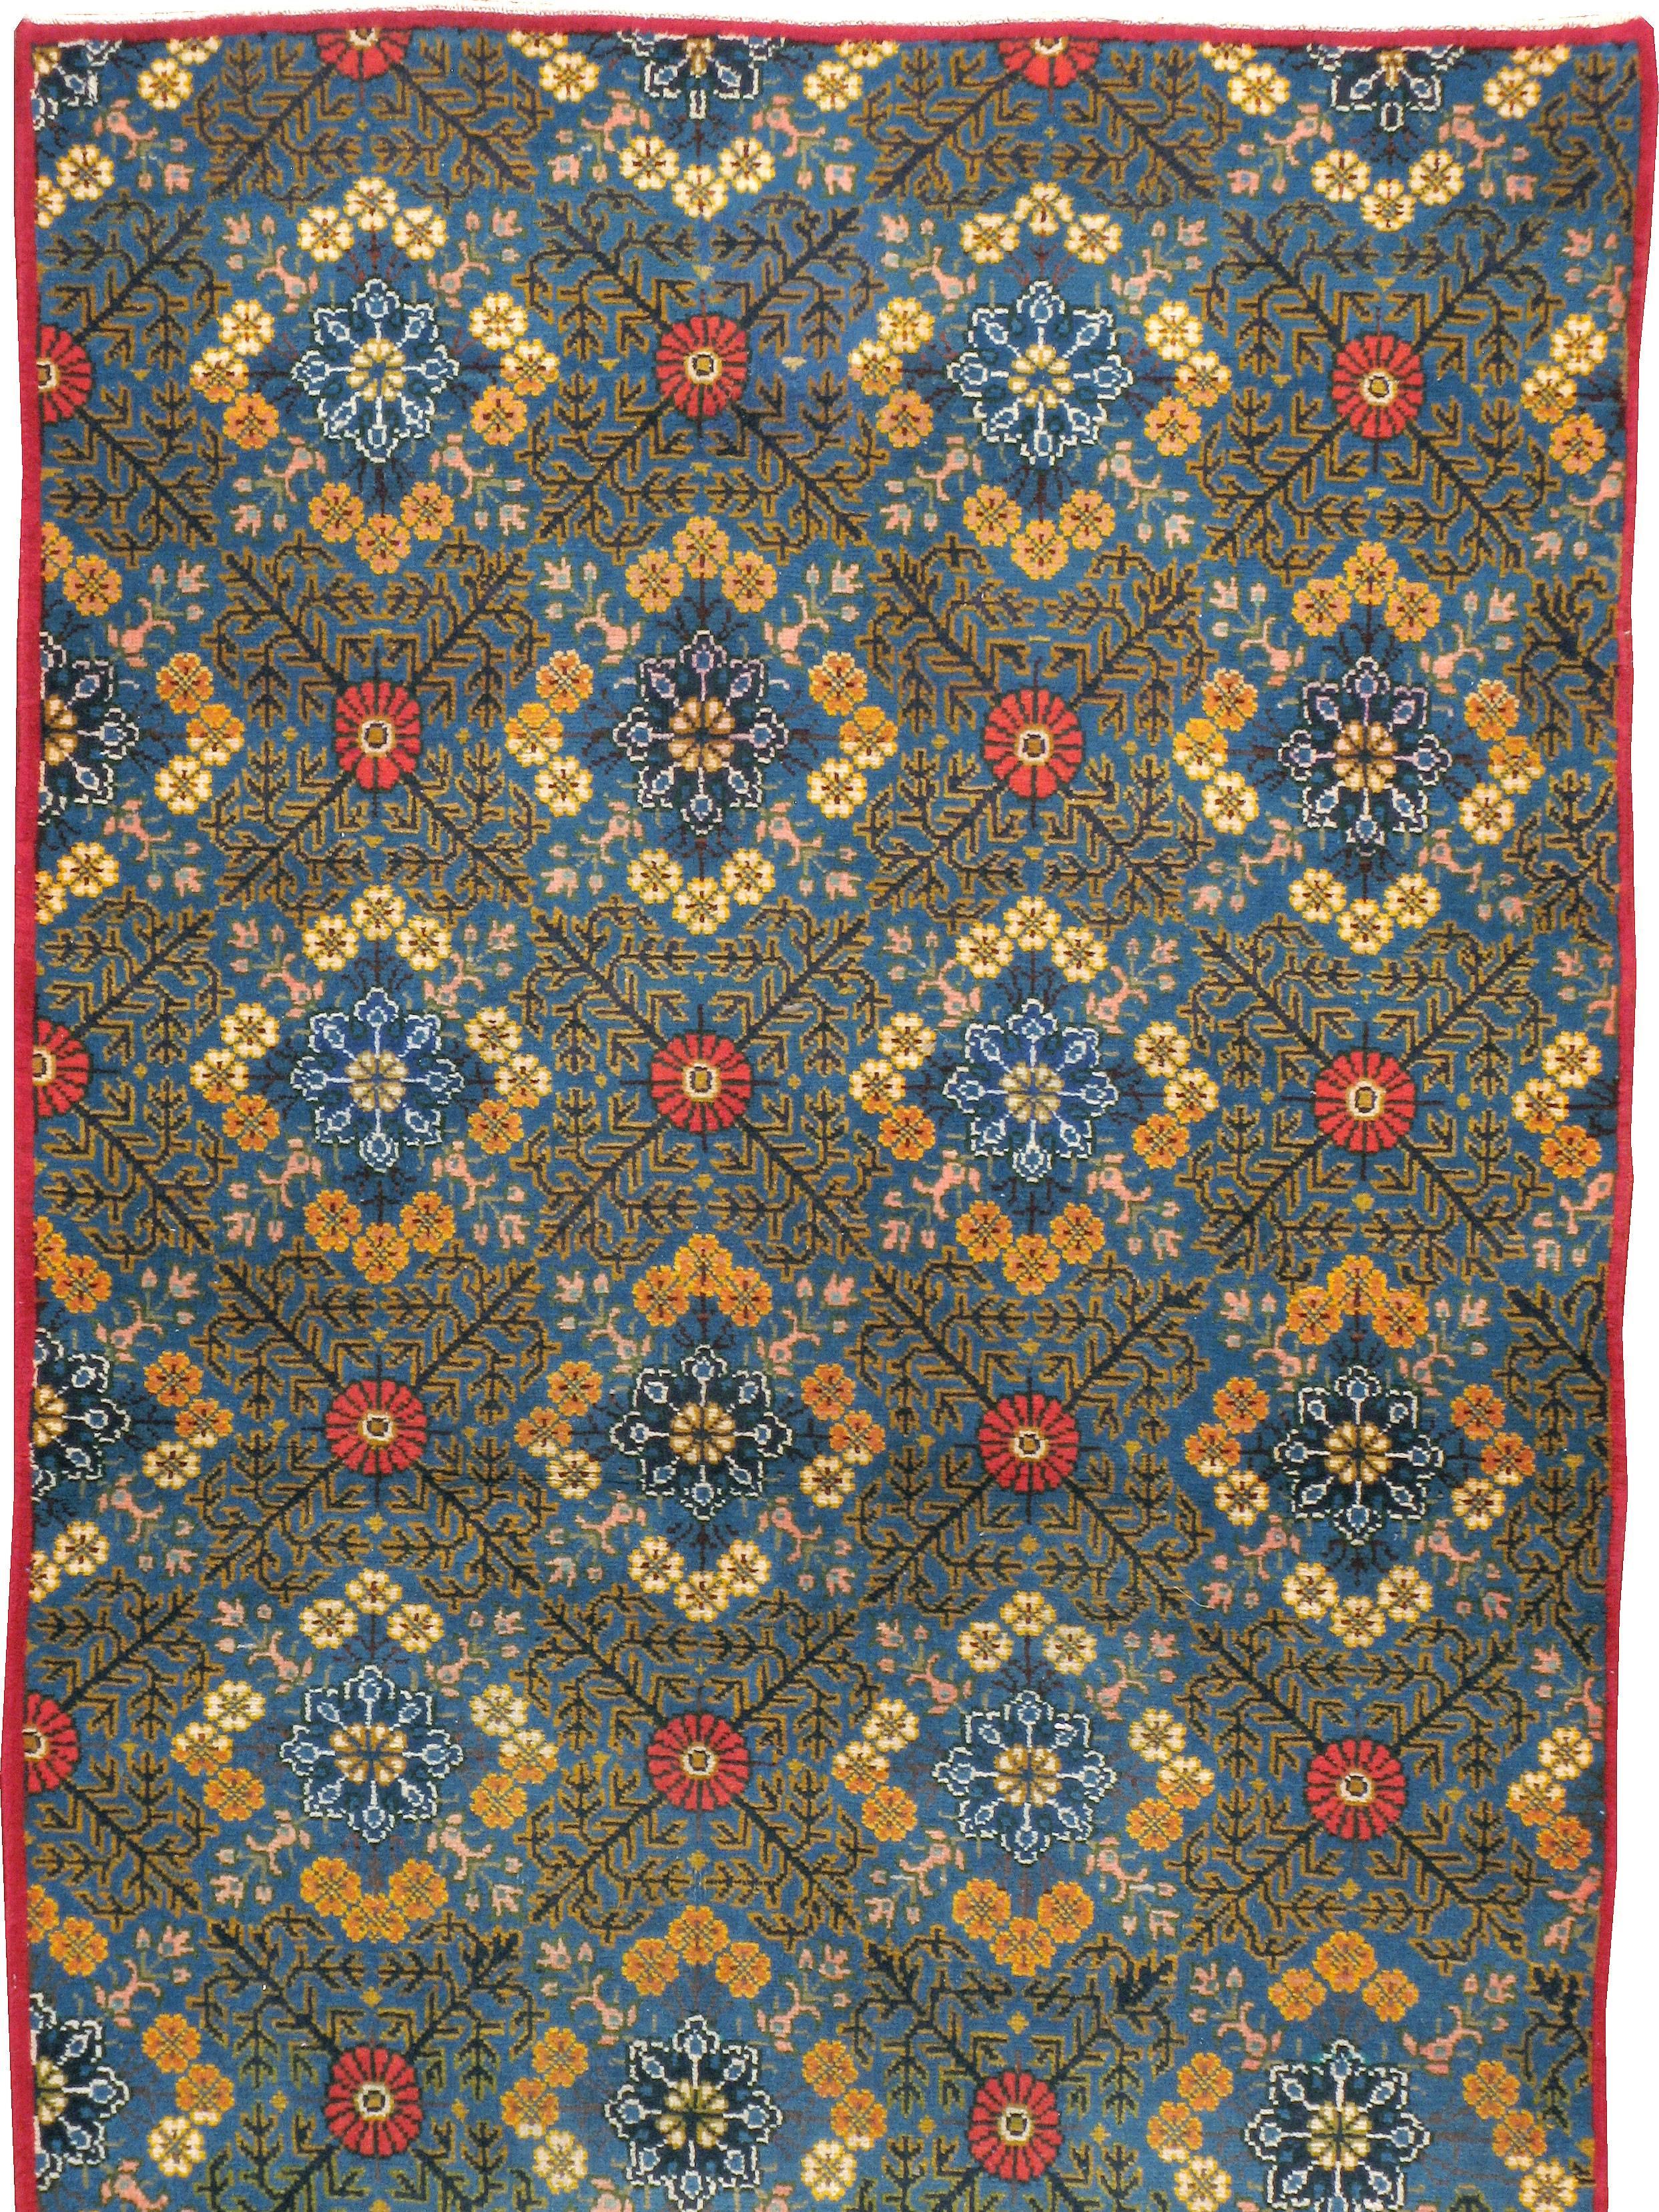 A vintage Persian Kashan carpet from the mid-20th century.